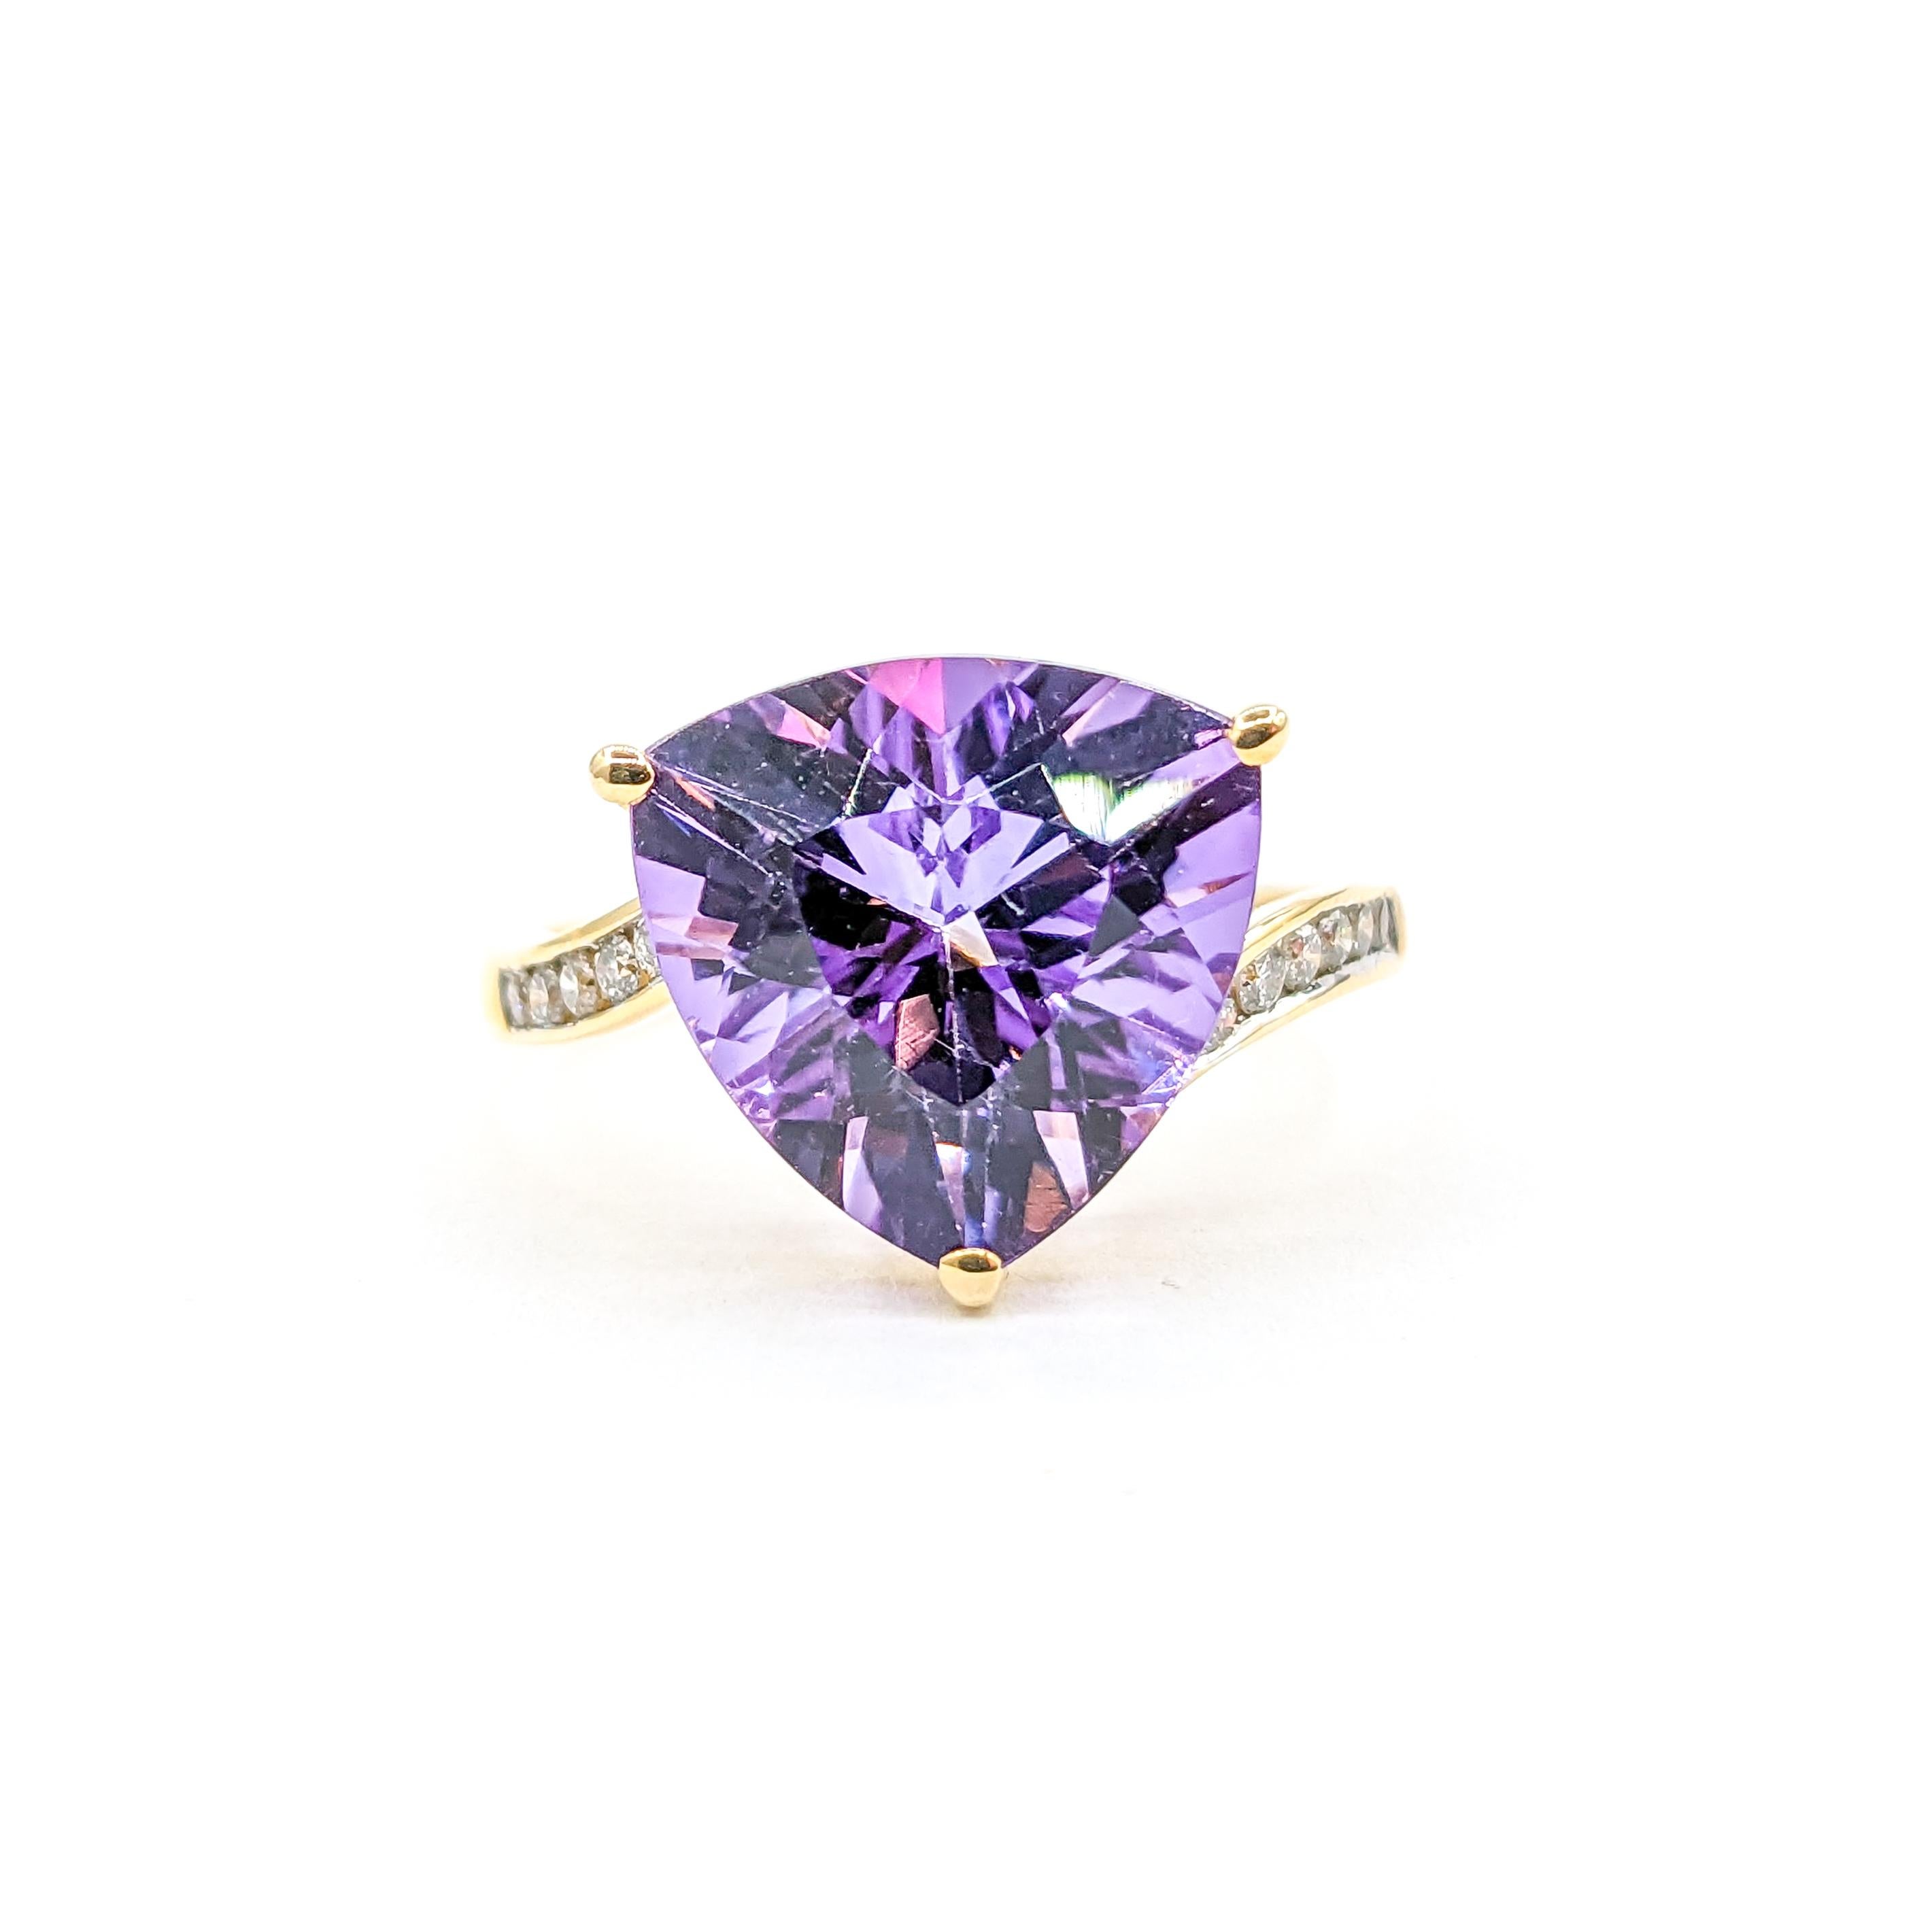 Trillion Cut Amethyst & Diamond Ring in 14K Gold

This stunning ring showcases a resplendent 12mm Amethyst at its heart, beautifully crafted in 14K yellow gold. Further enhancing this mesmerizing gem are dazzling round diamonds, with a total carat